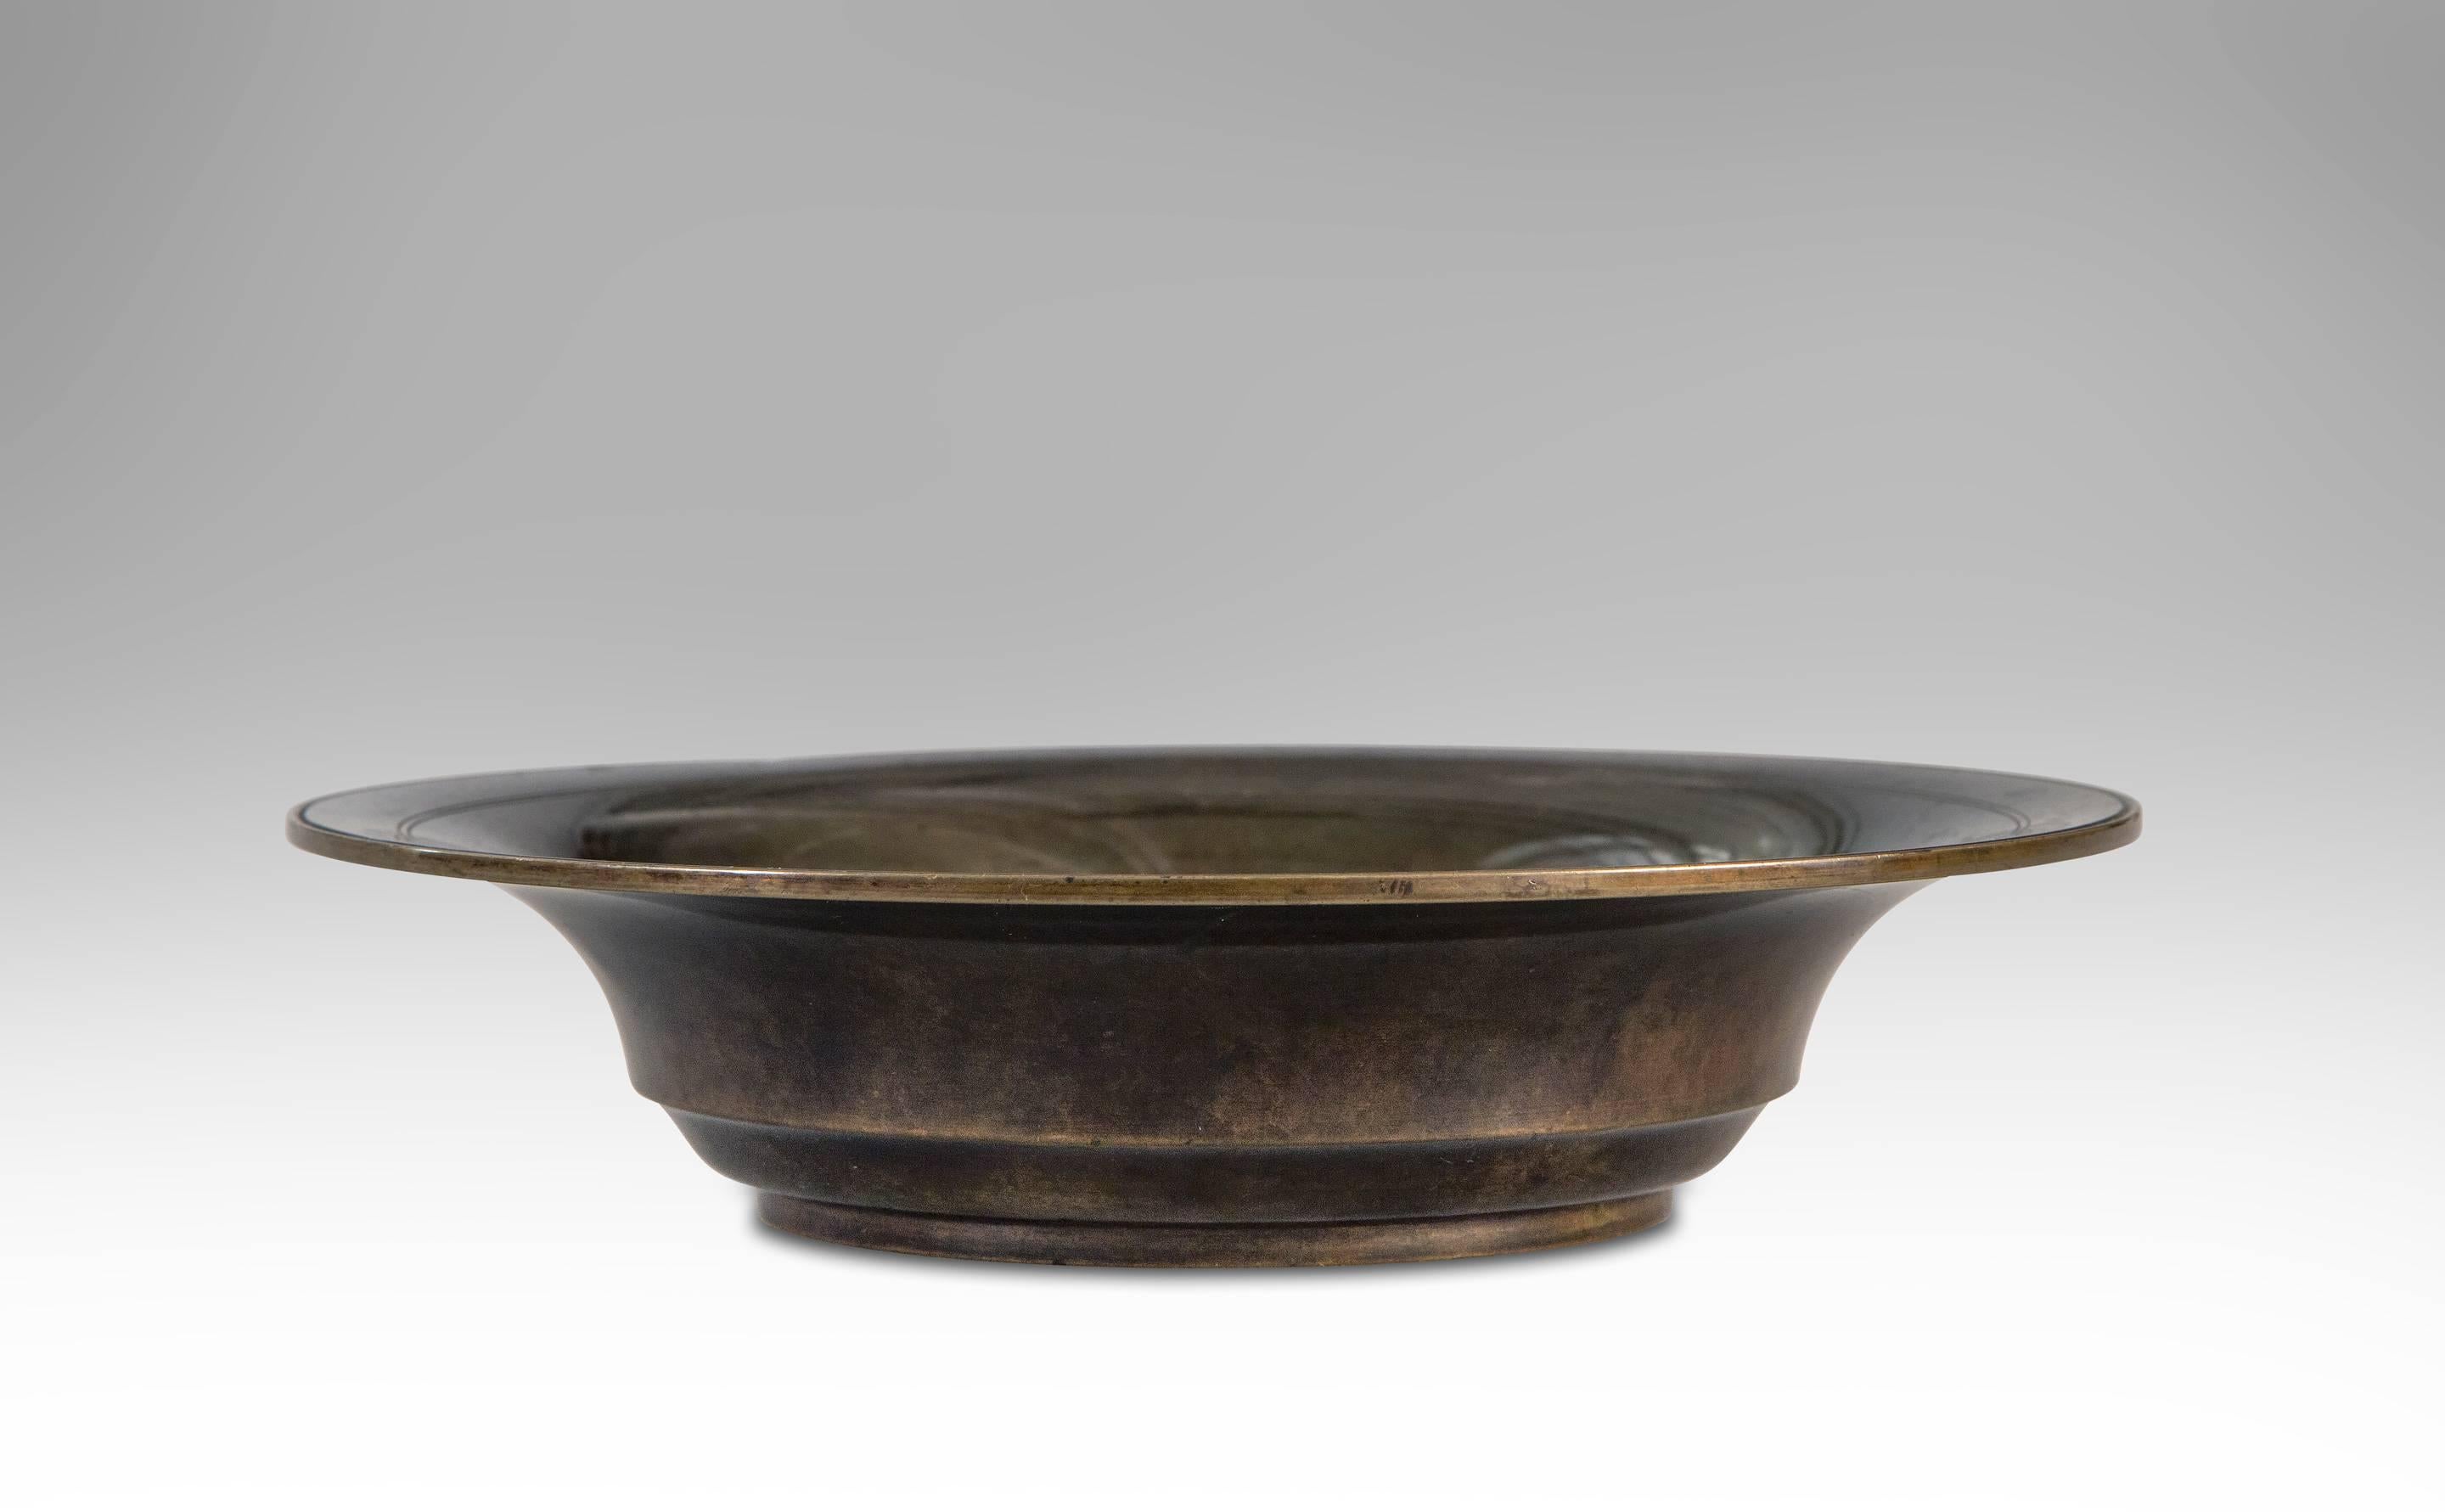 The flared lip with double-ring banding, above a molded base. Signed: JUST DENMARK B174